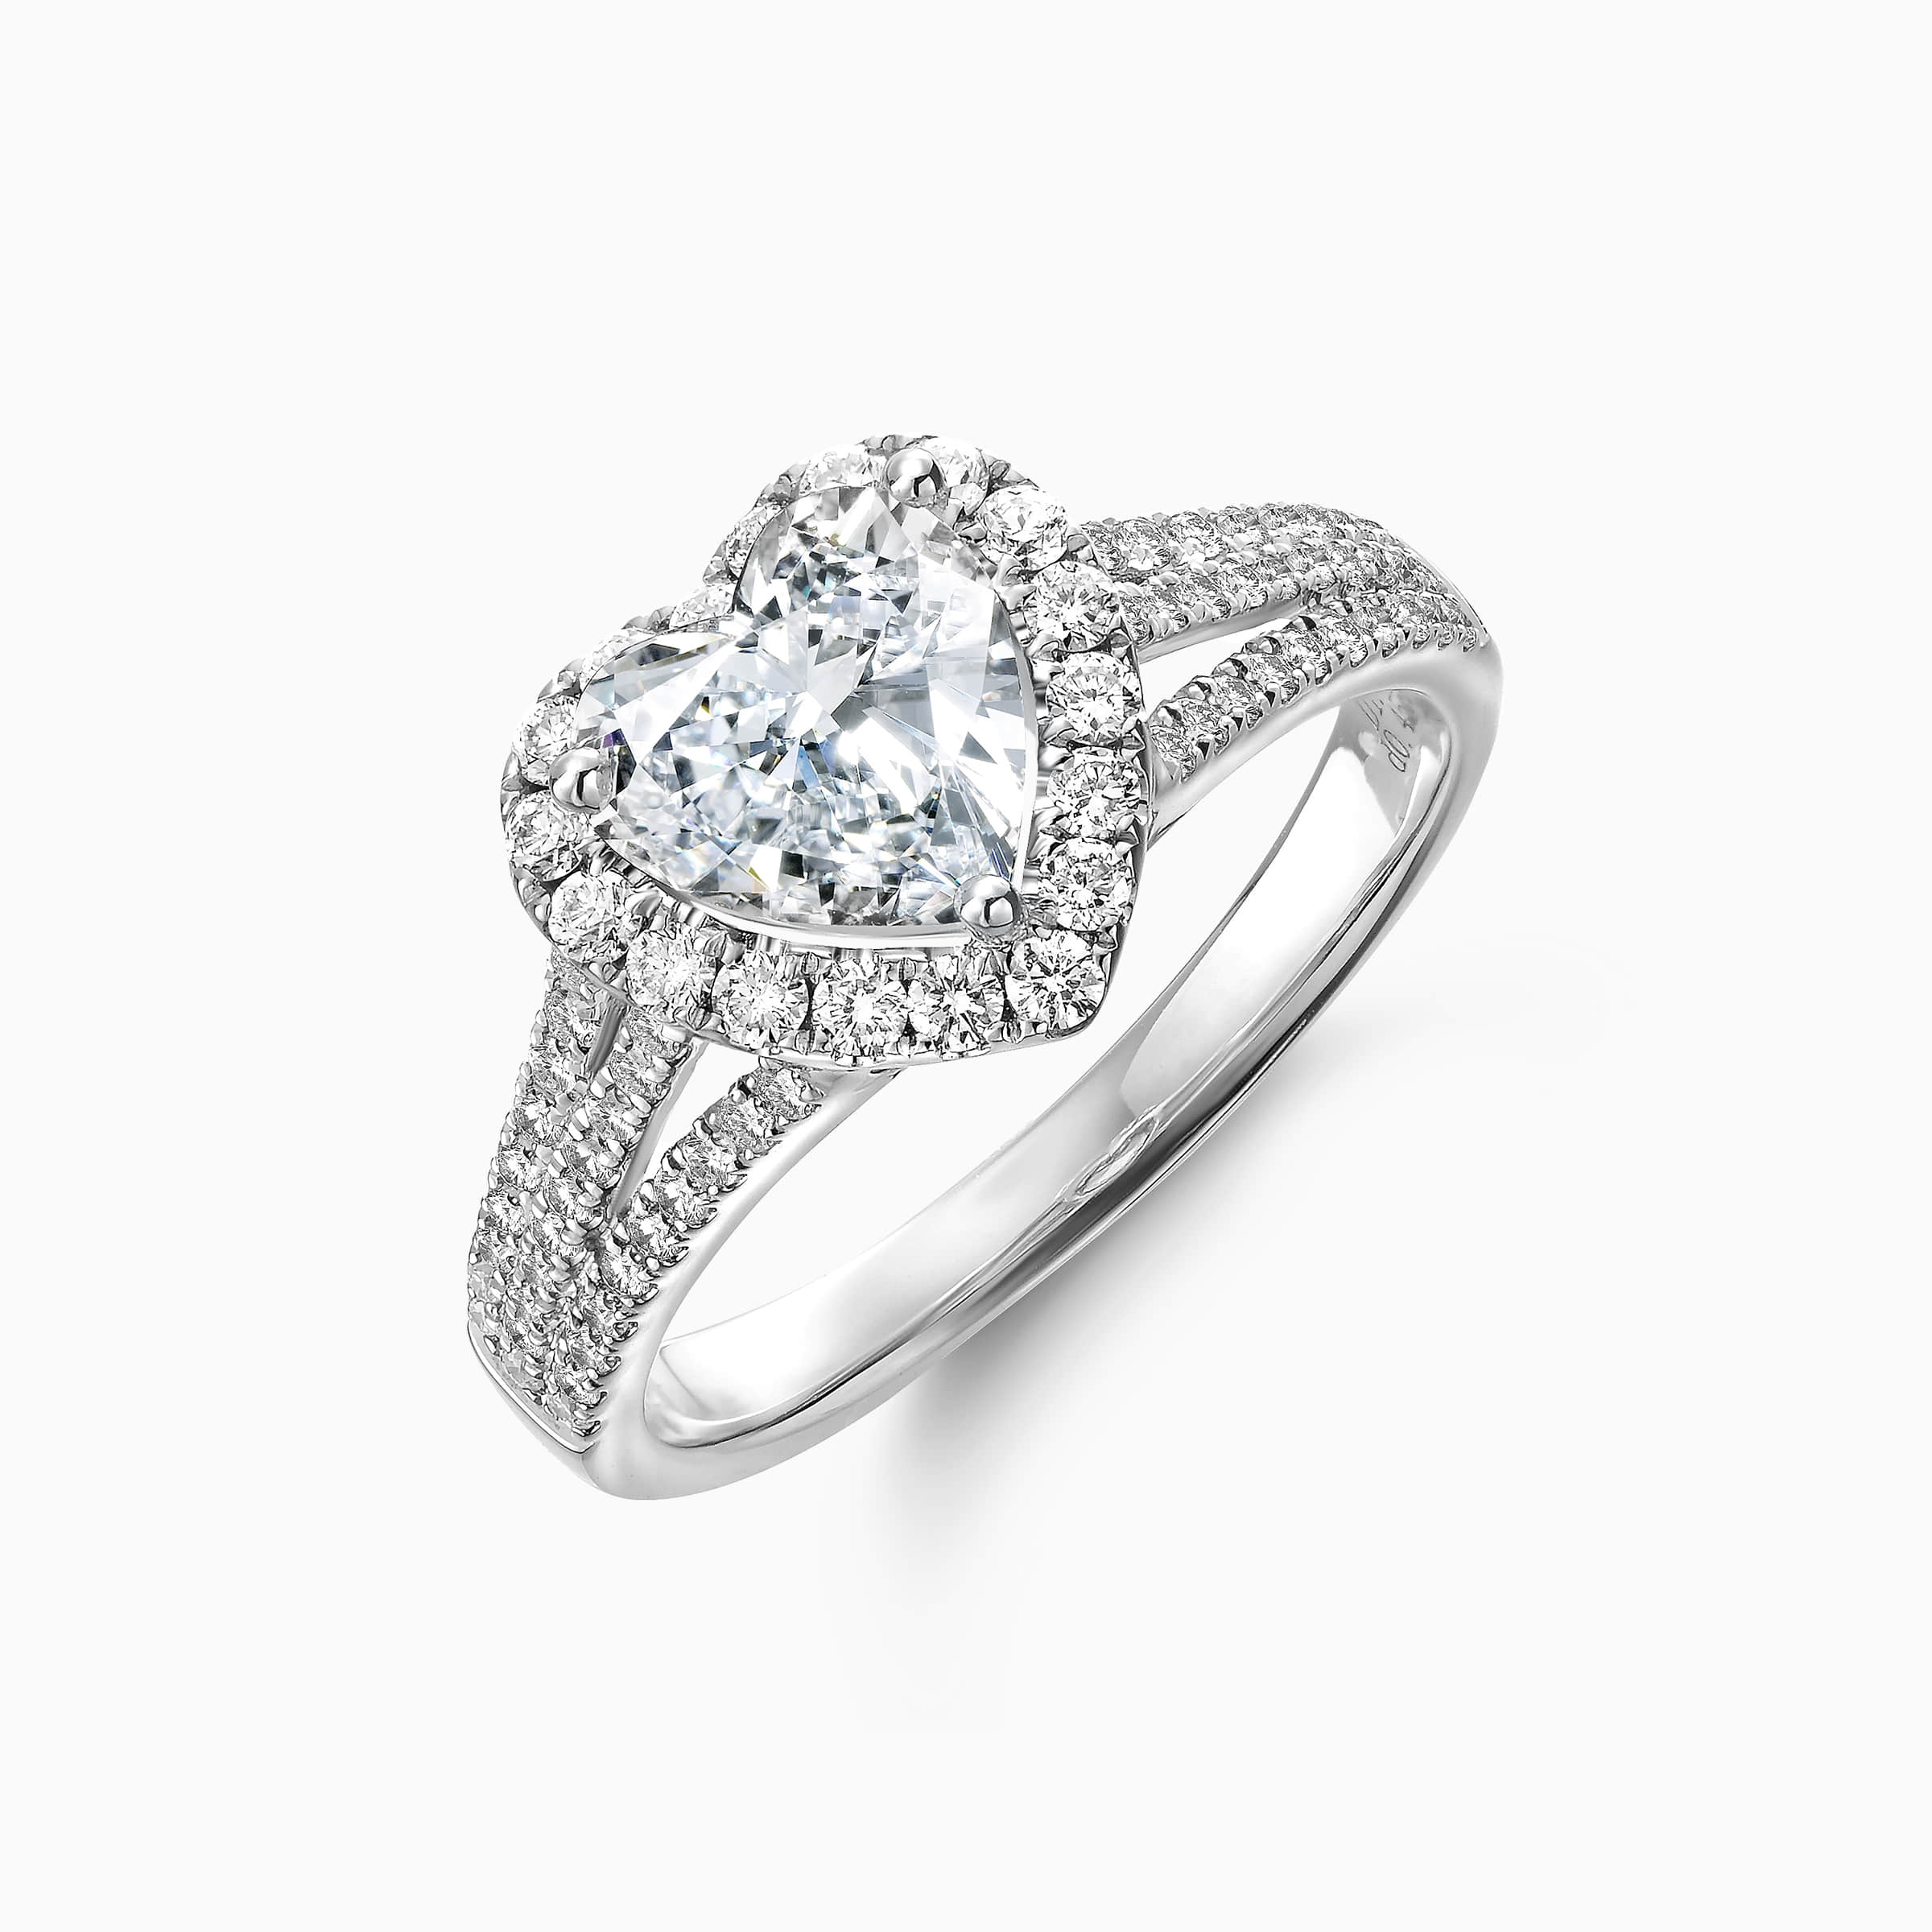 Darry Ring heart promise ring side view